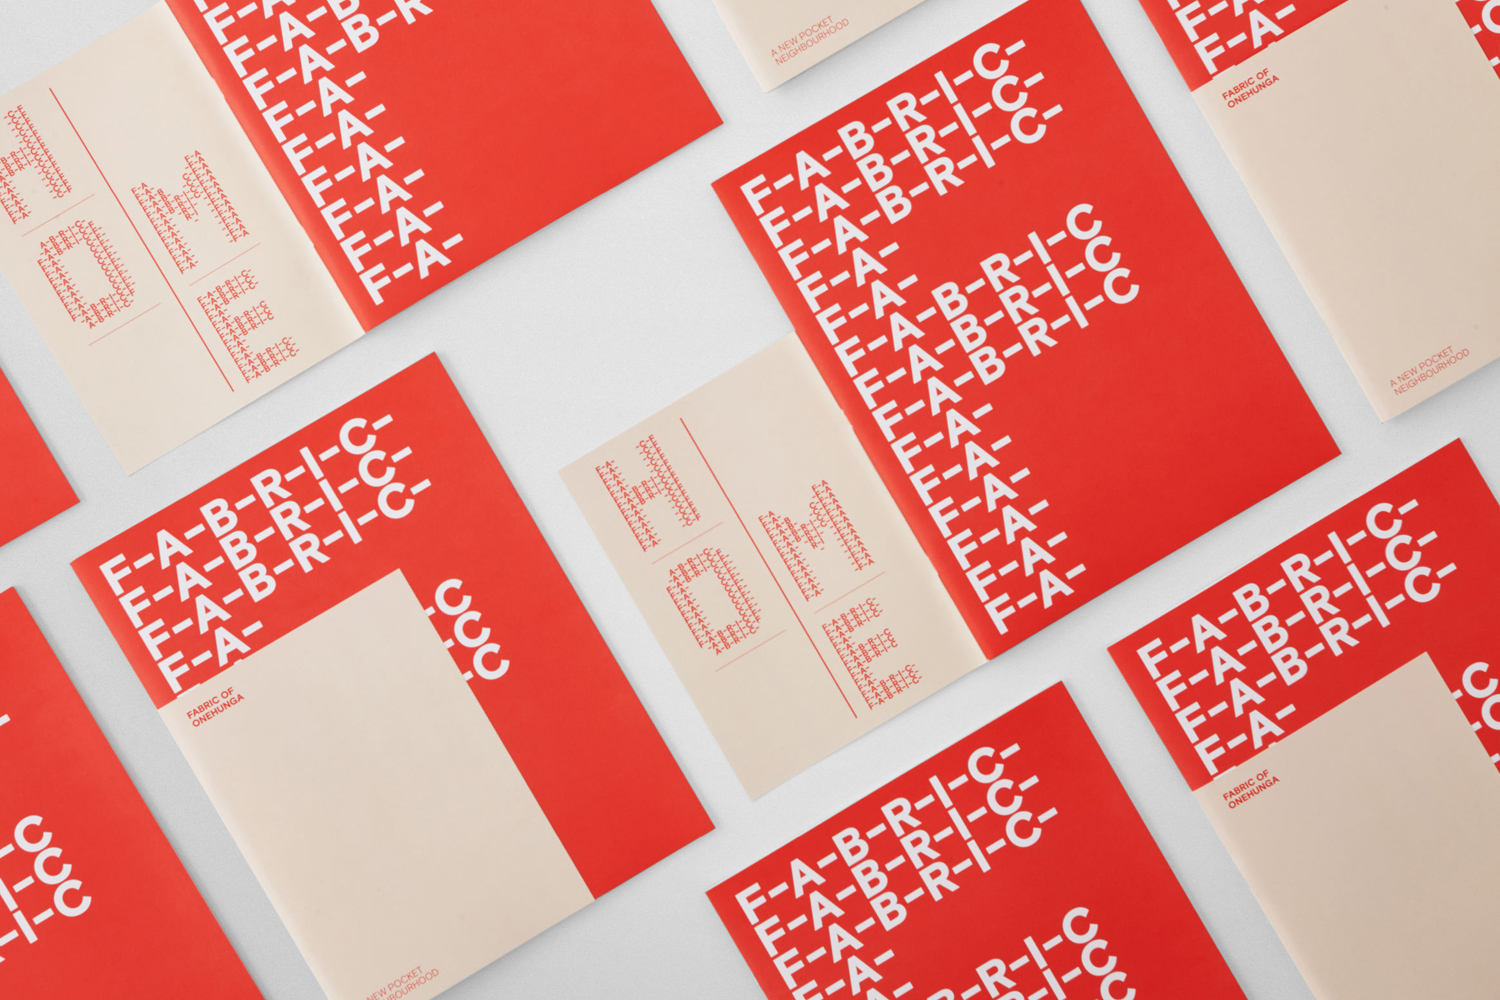 Brand identity and brochure by Richards Partners for Auckland residential development Fabric of Onehunga